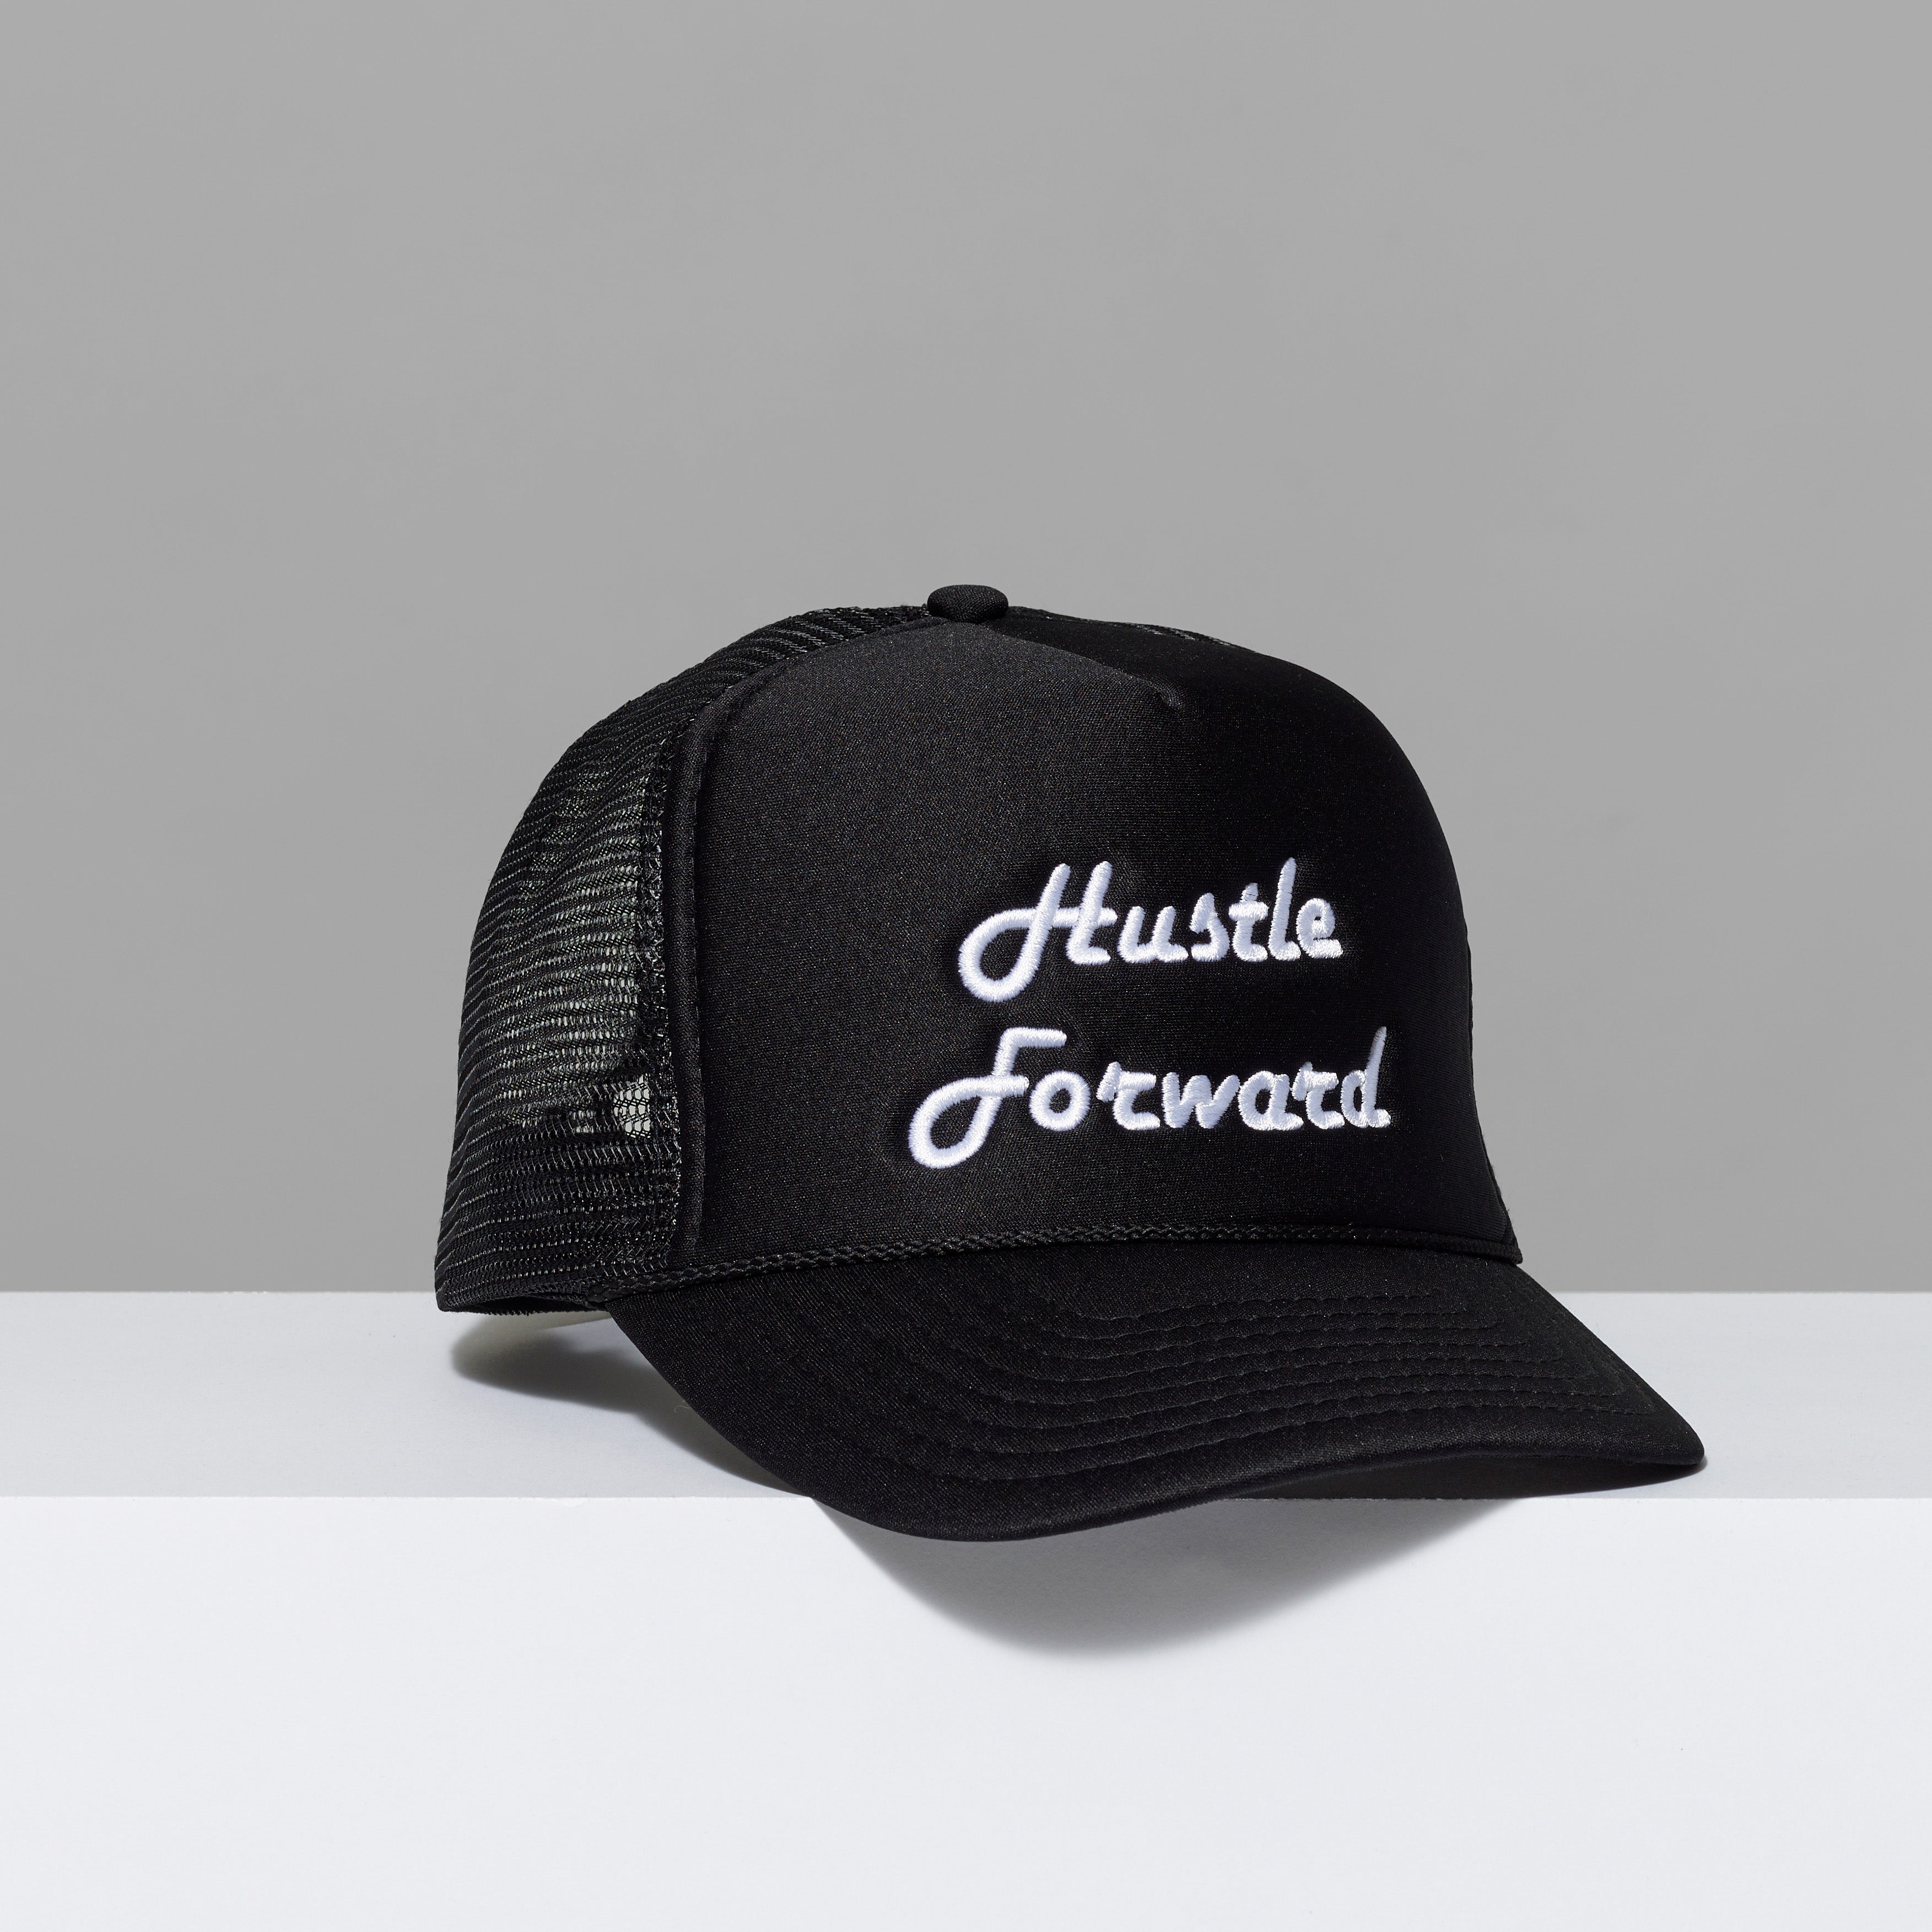 Black baseball cap with Hustle Forward embroidered in white stitching.